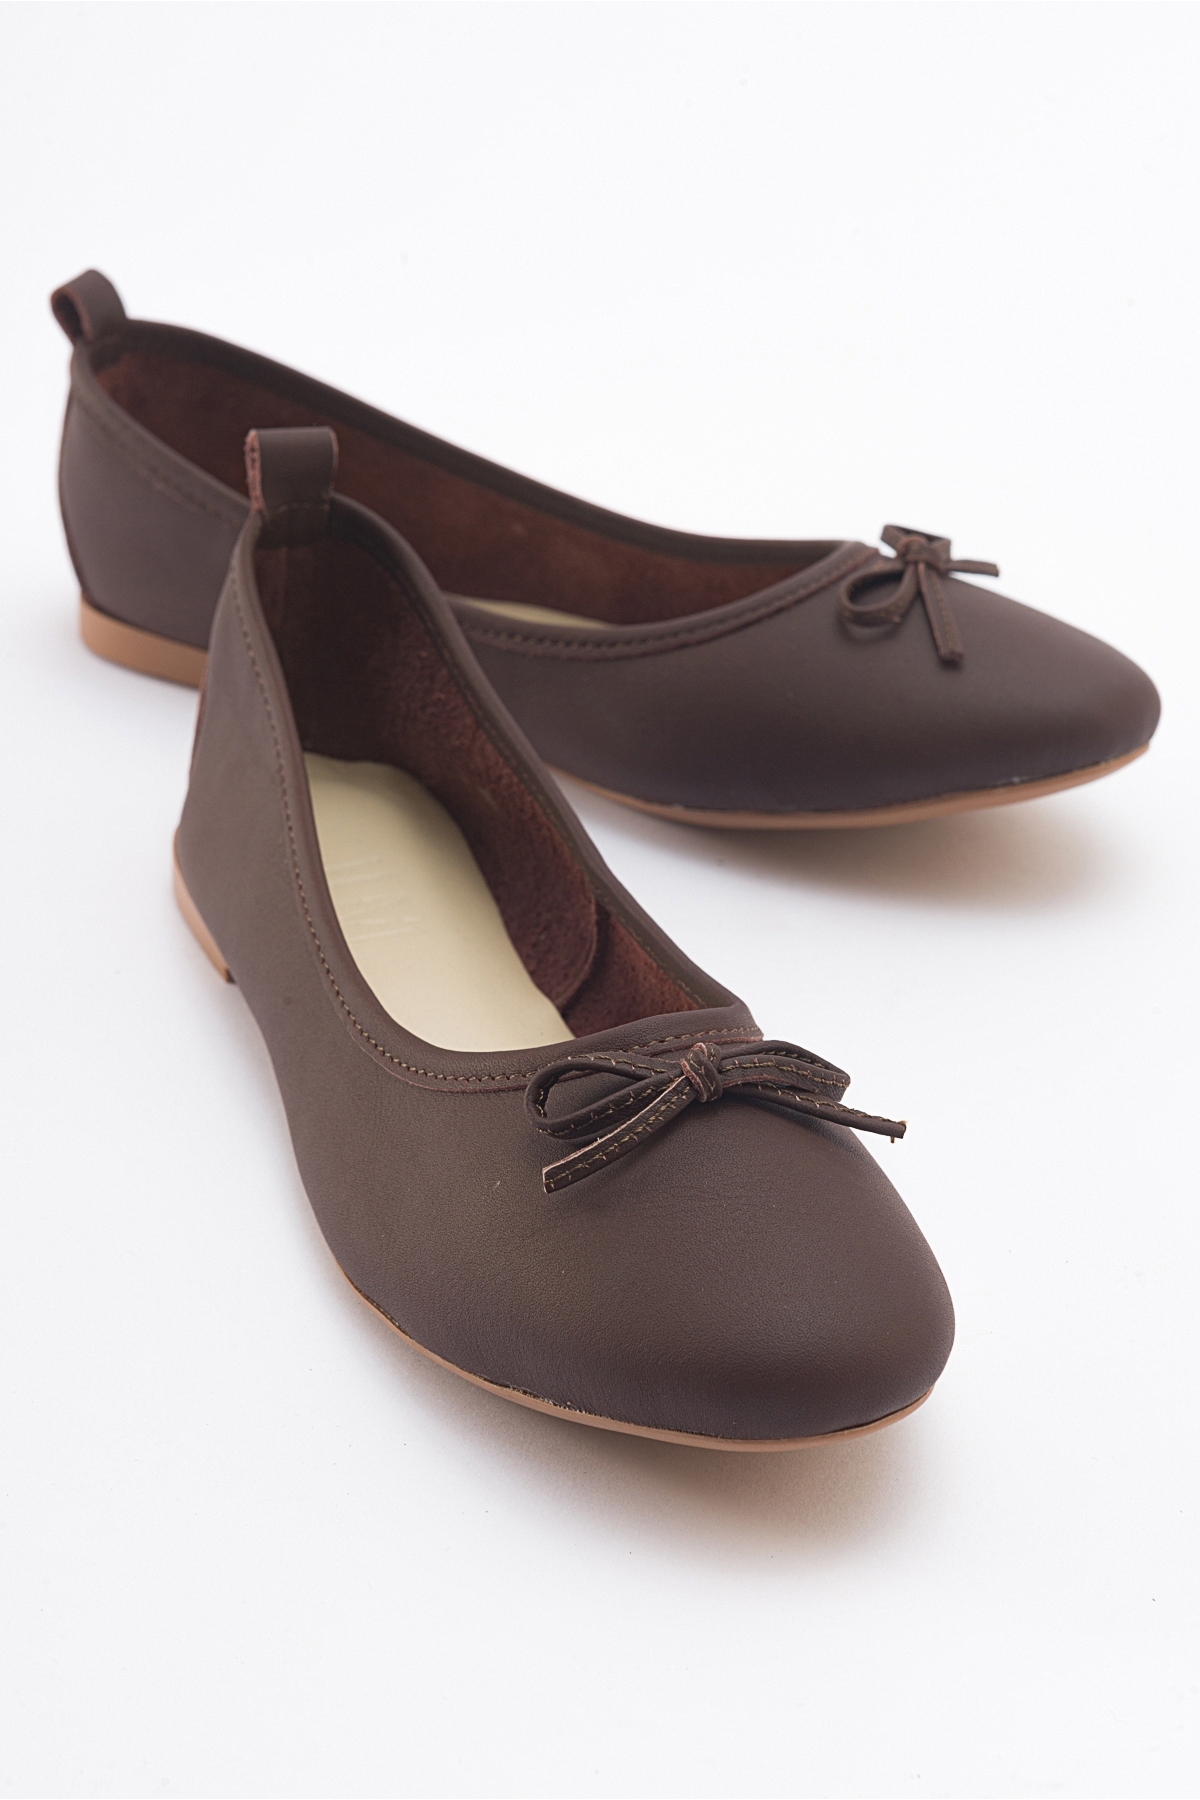 Levně LuviShoes 01 Brown Skin Genuine Leather Women's Flat Shoes.